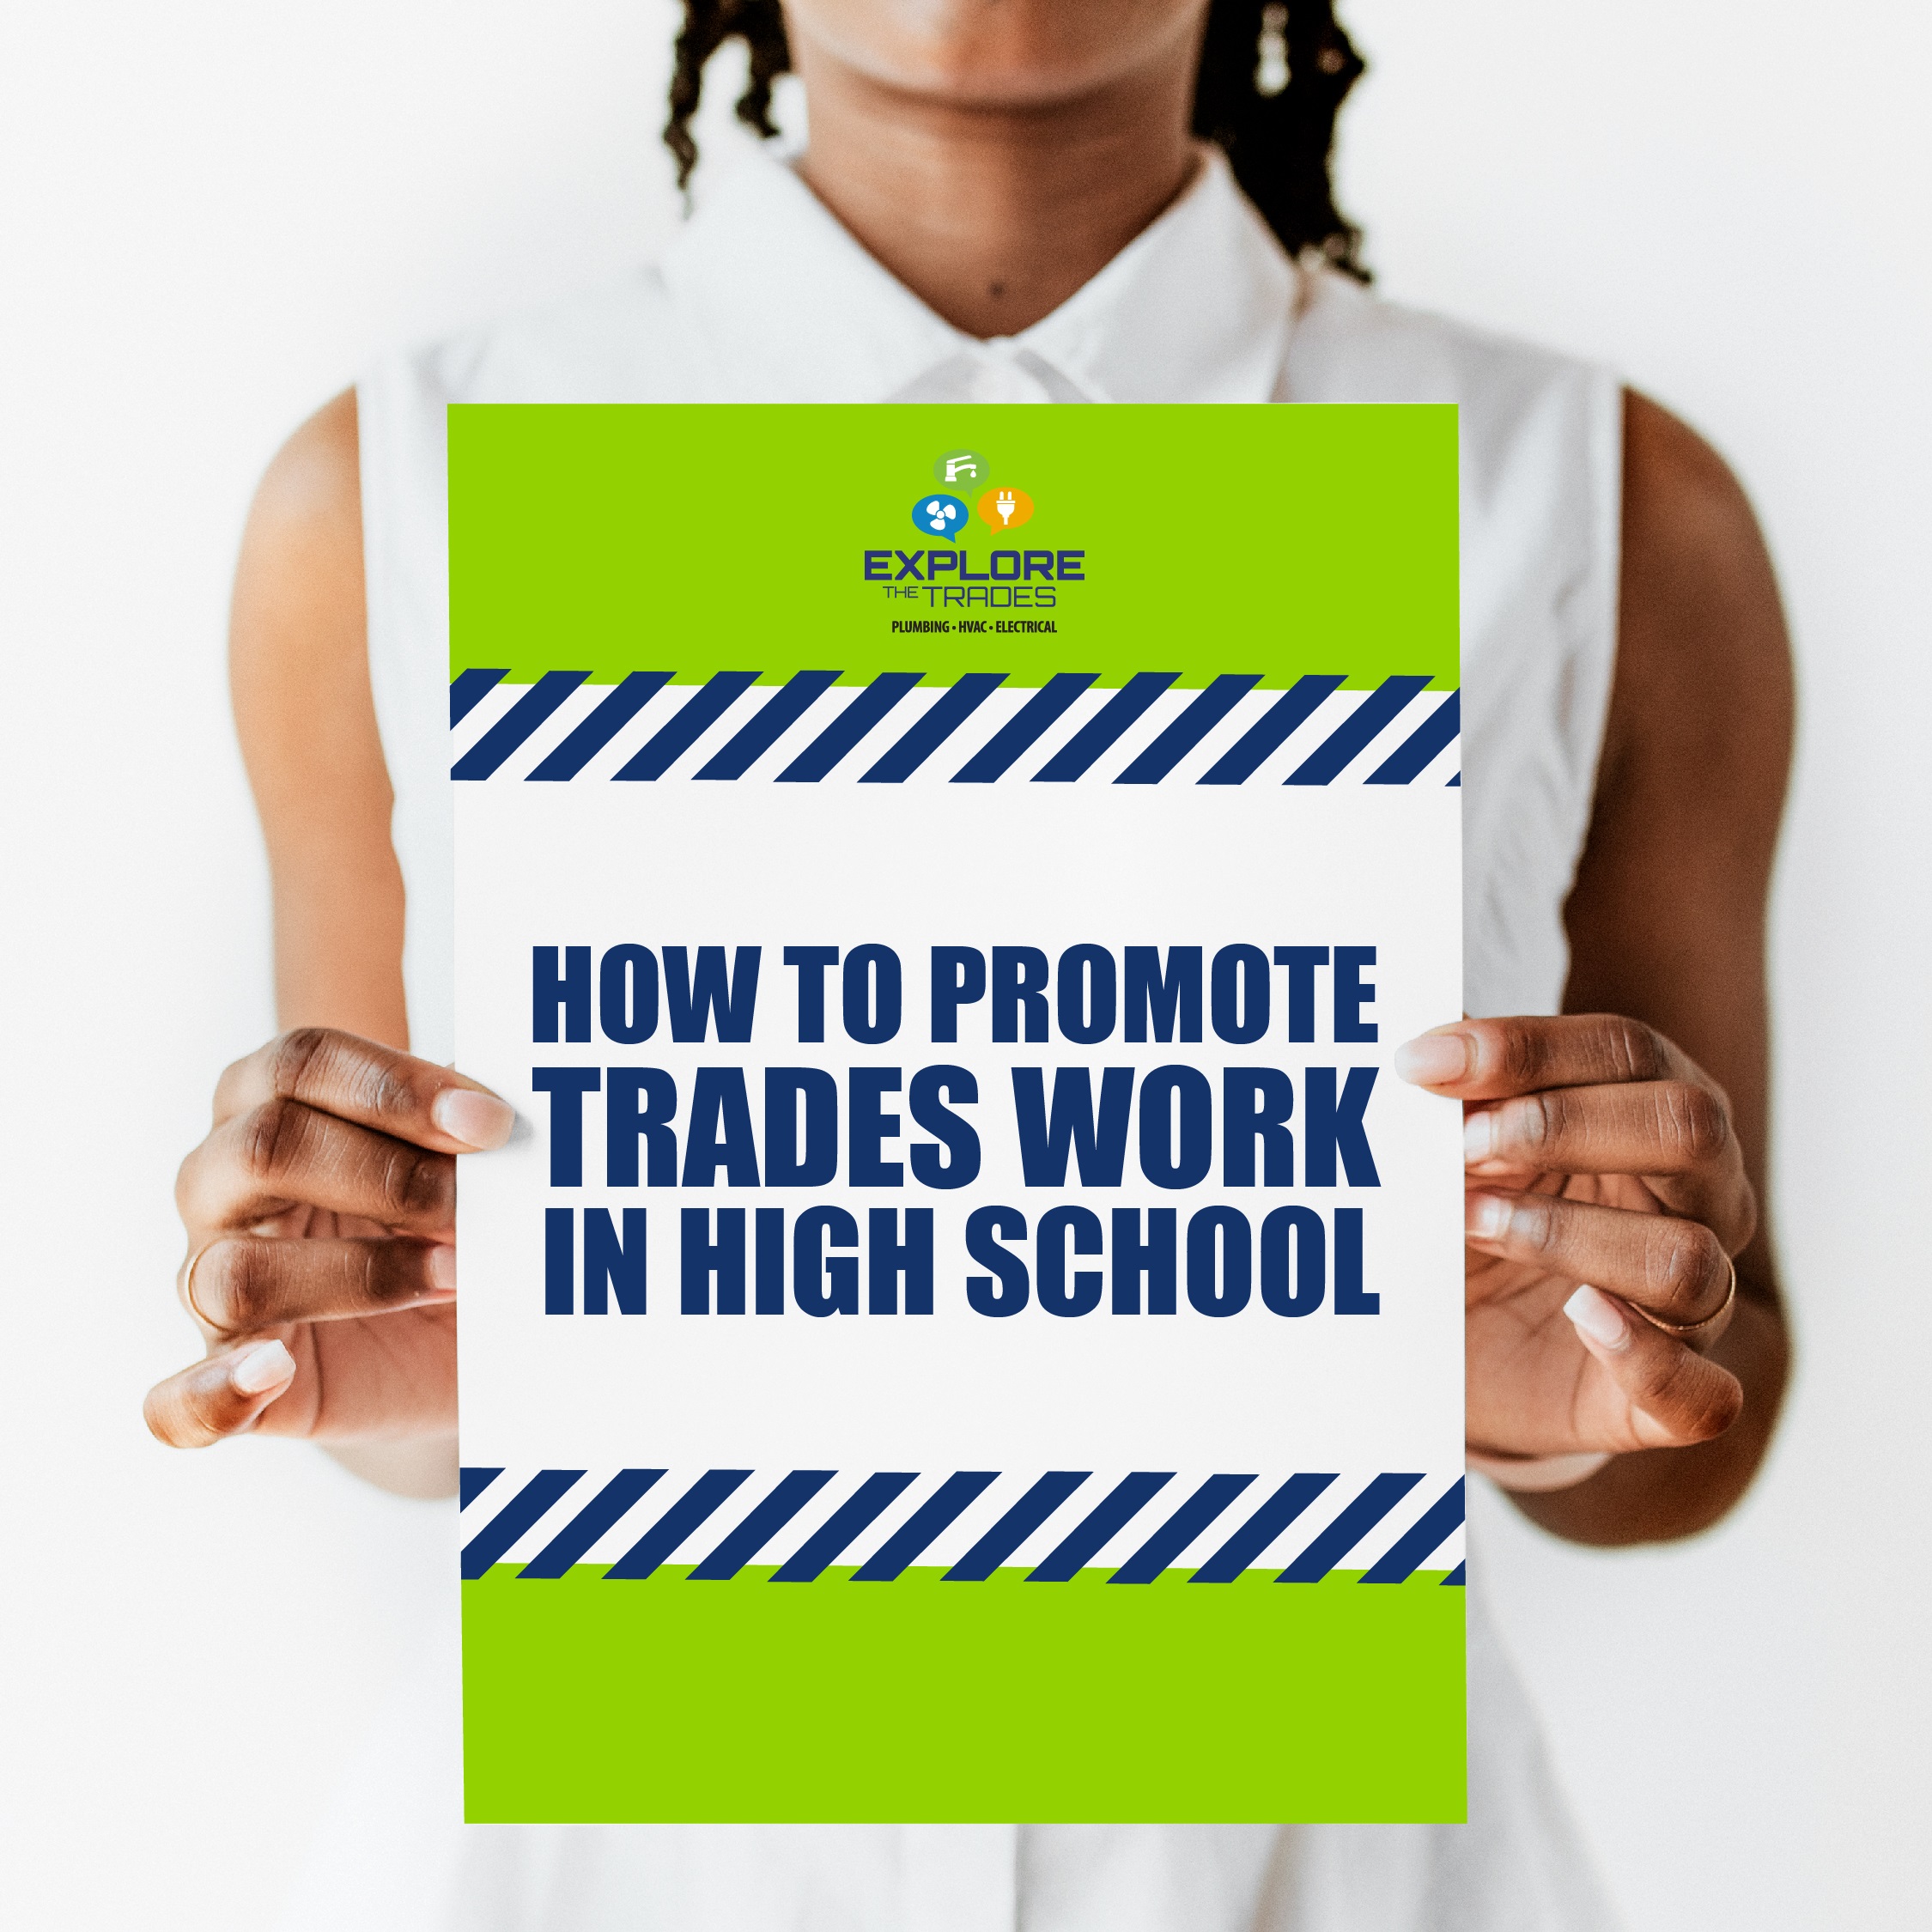 How To Promote Trades Work in High School